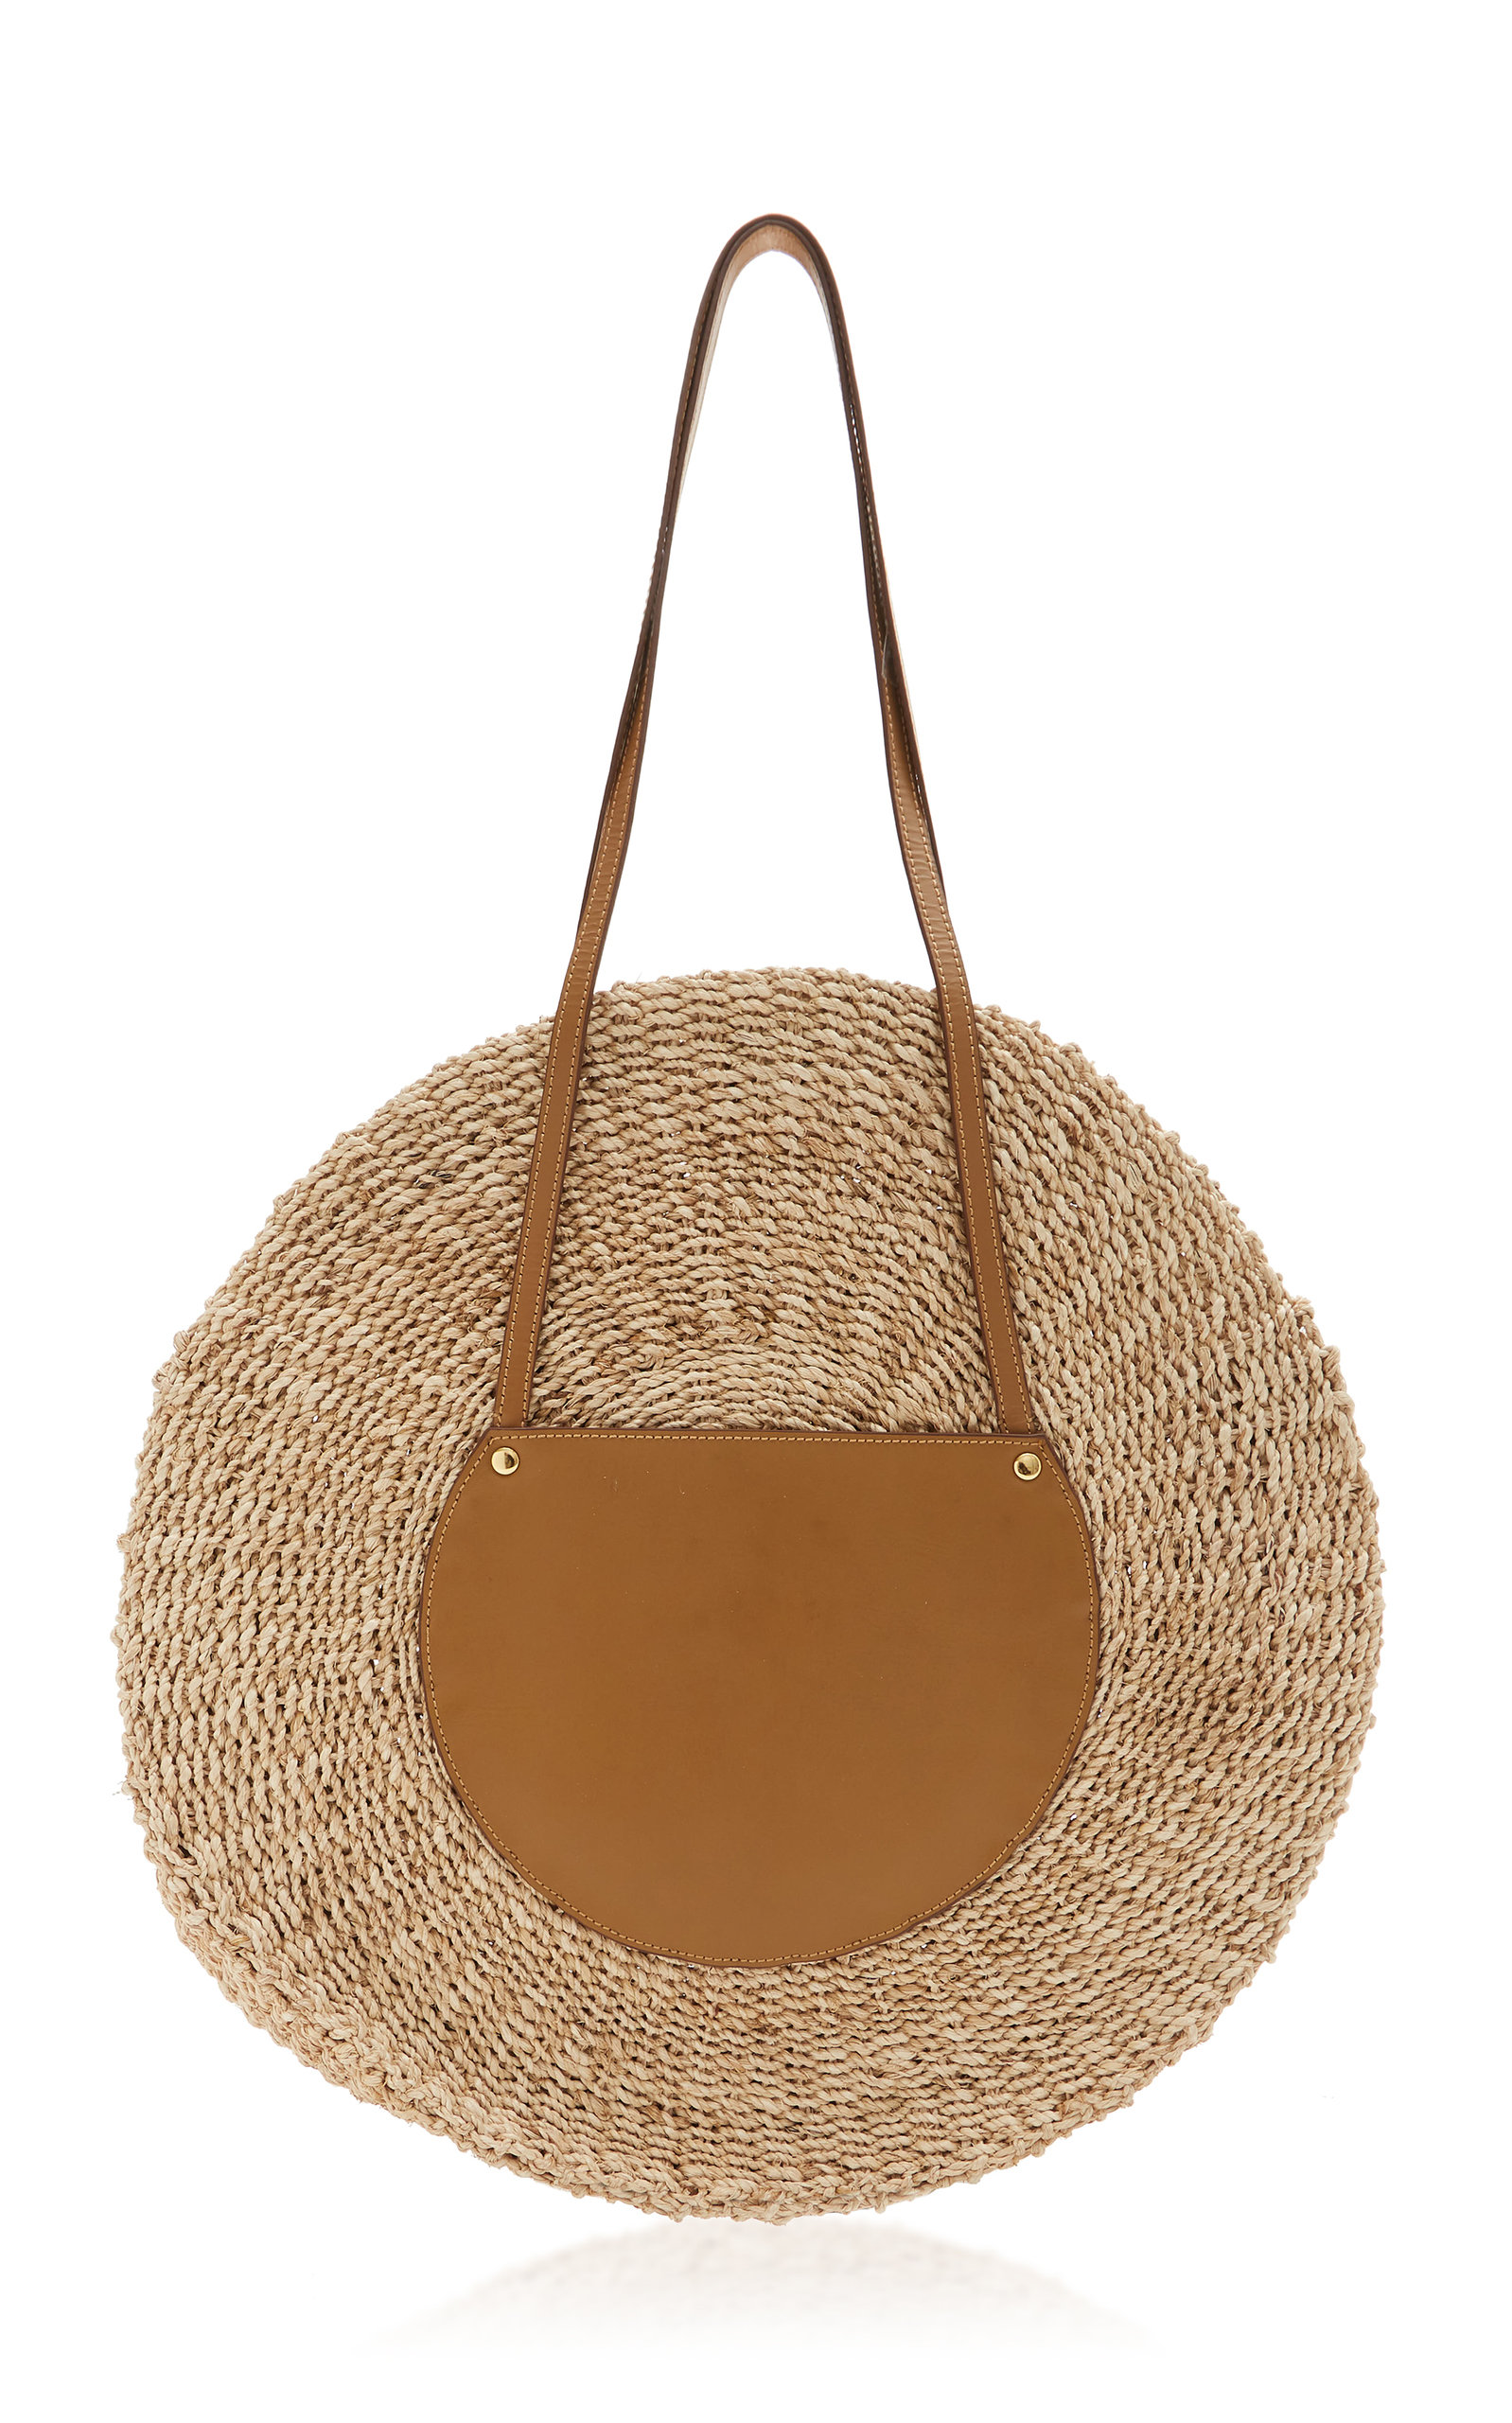 Kayu BELEN LEATHER-TRIMMED WOVEN STRAW TOTE